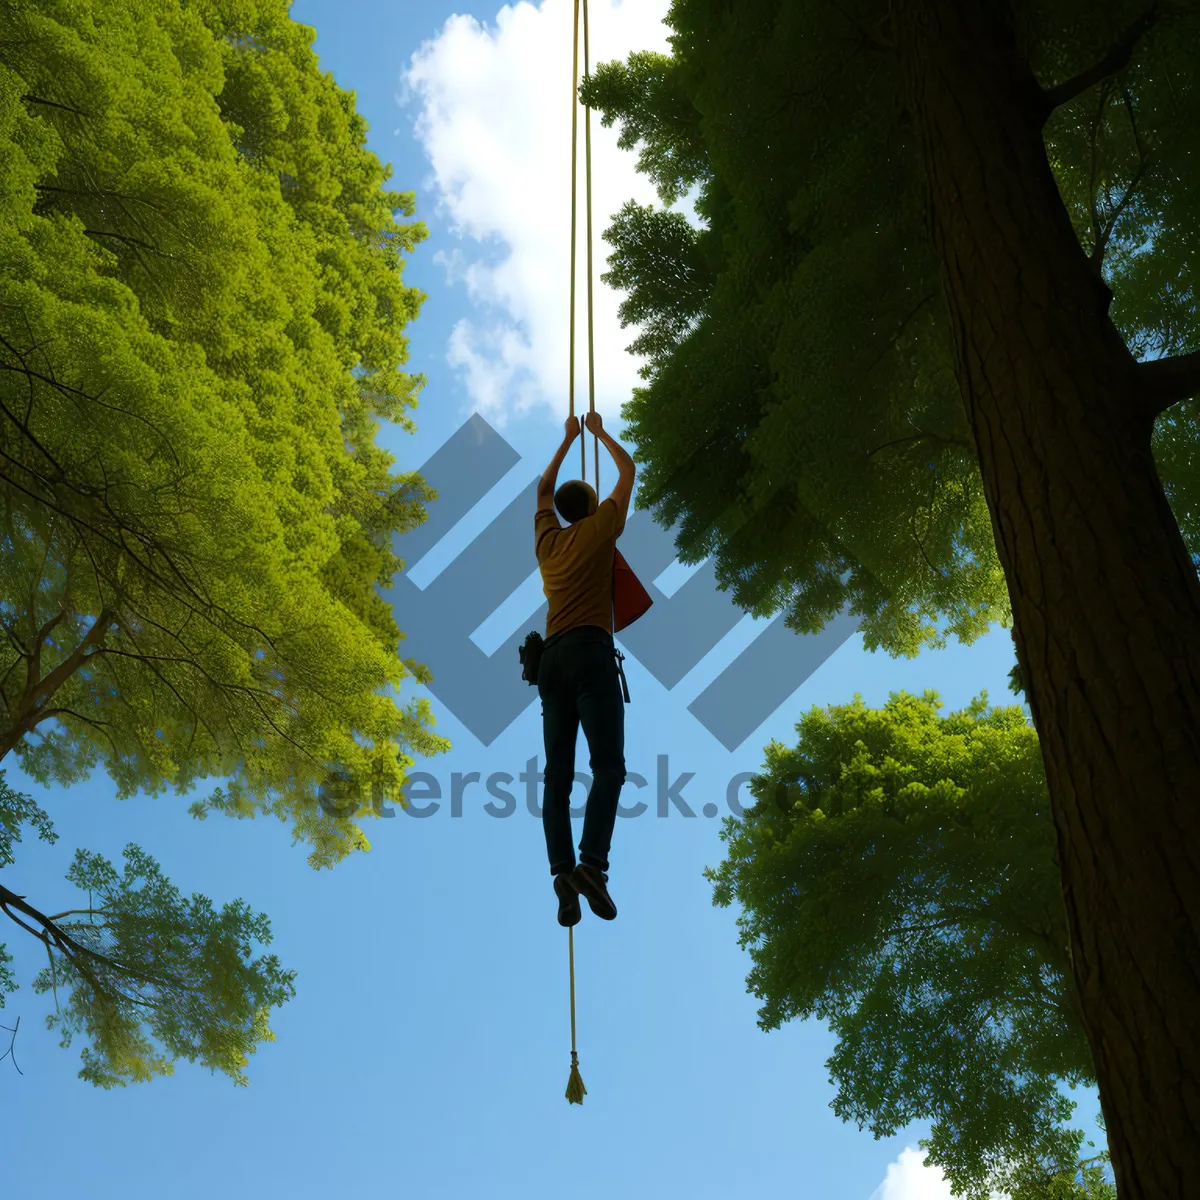 Picture of Outdoor Swing on Tree with Mechanical Device